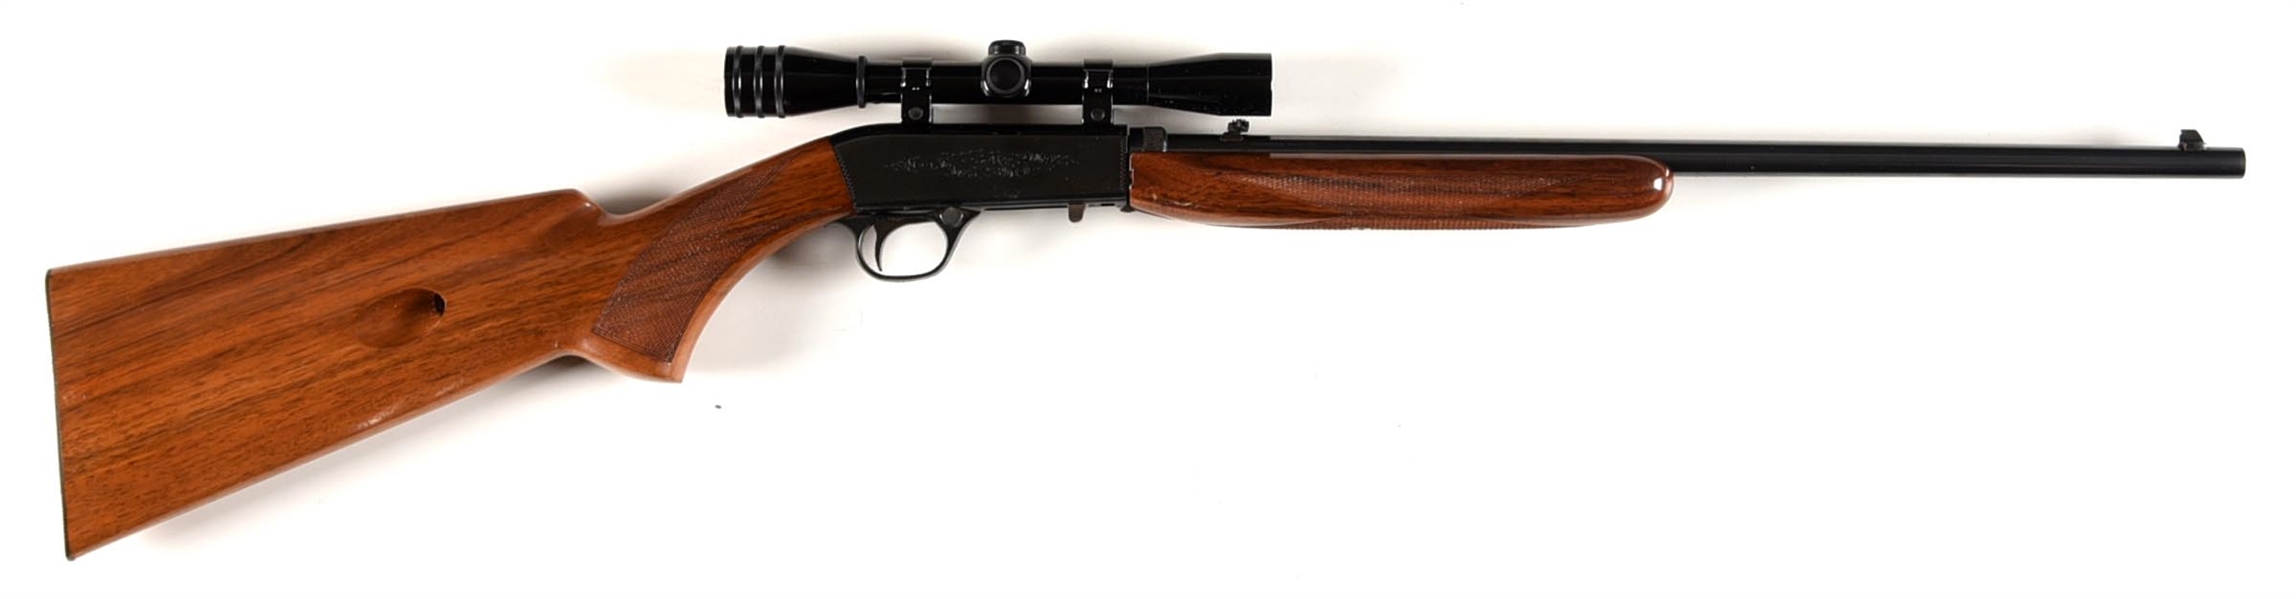 (C) BELGIAN BROWNING SA22 SEMI-AUTOMATIC RIFLE WITH CASE.